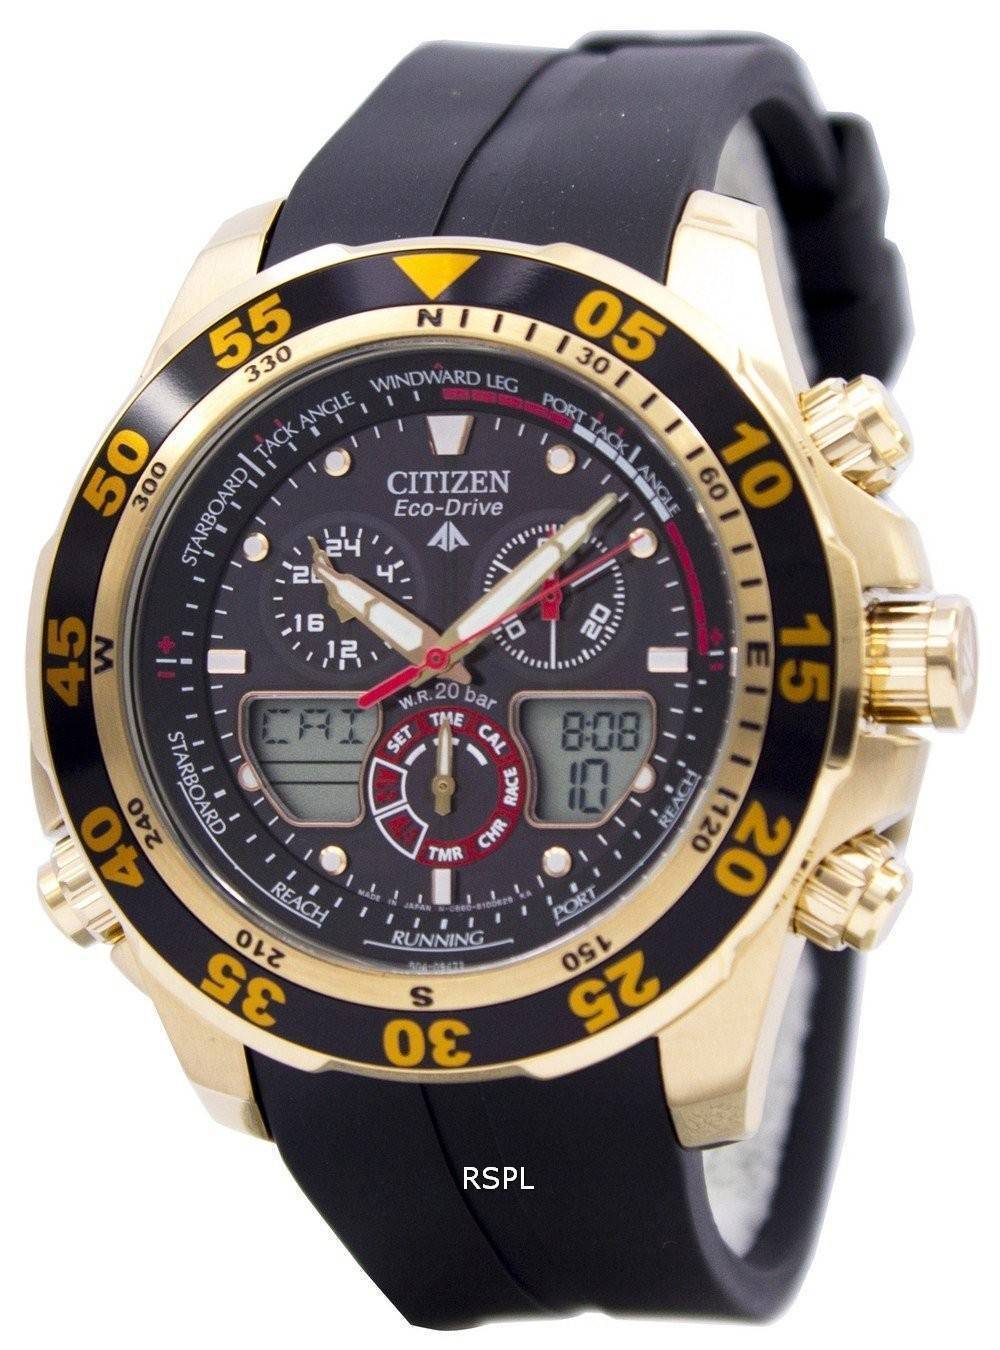 Citizens Eco Drive Watch Manual